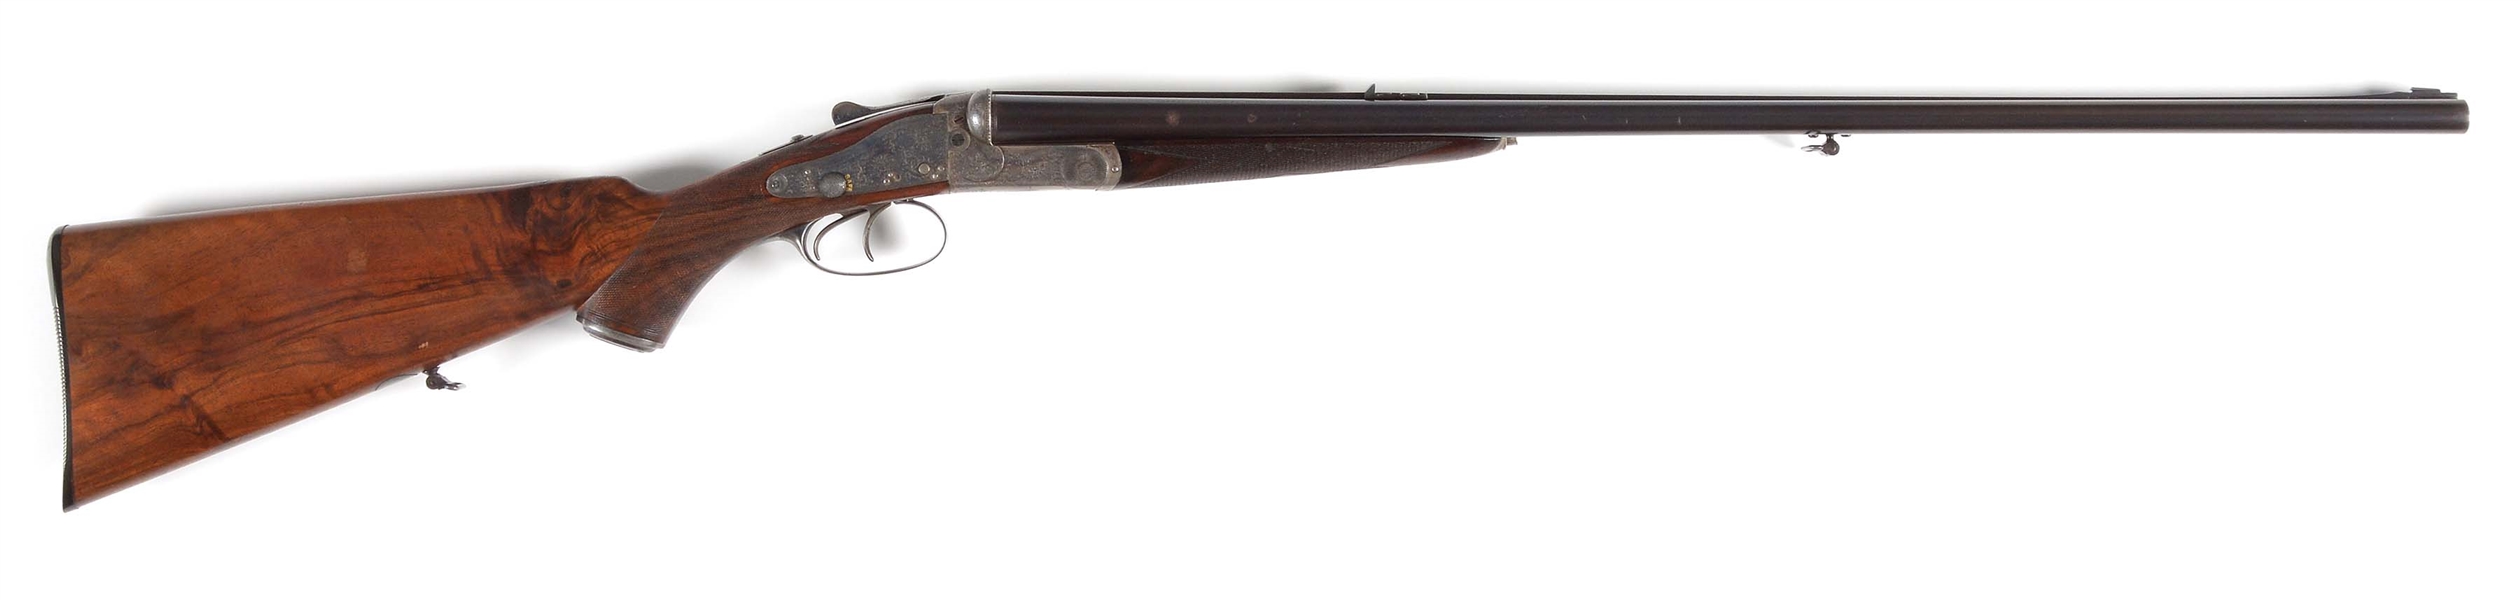 (A) HOLLAND & HOLLAND SIDELOCK DOUBLE RIFLE IN HIGH ORIGINAL CONDITION WITH UNUSUAL STALKING SAFETIES. 